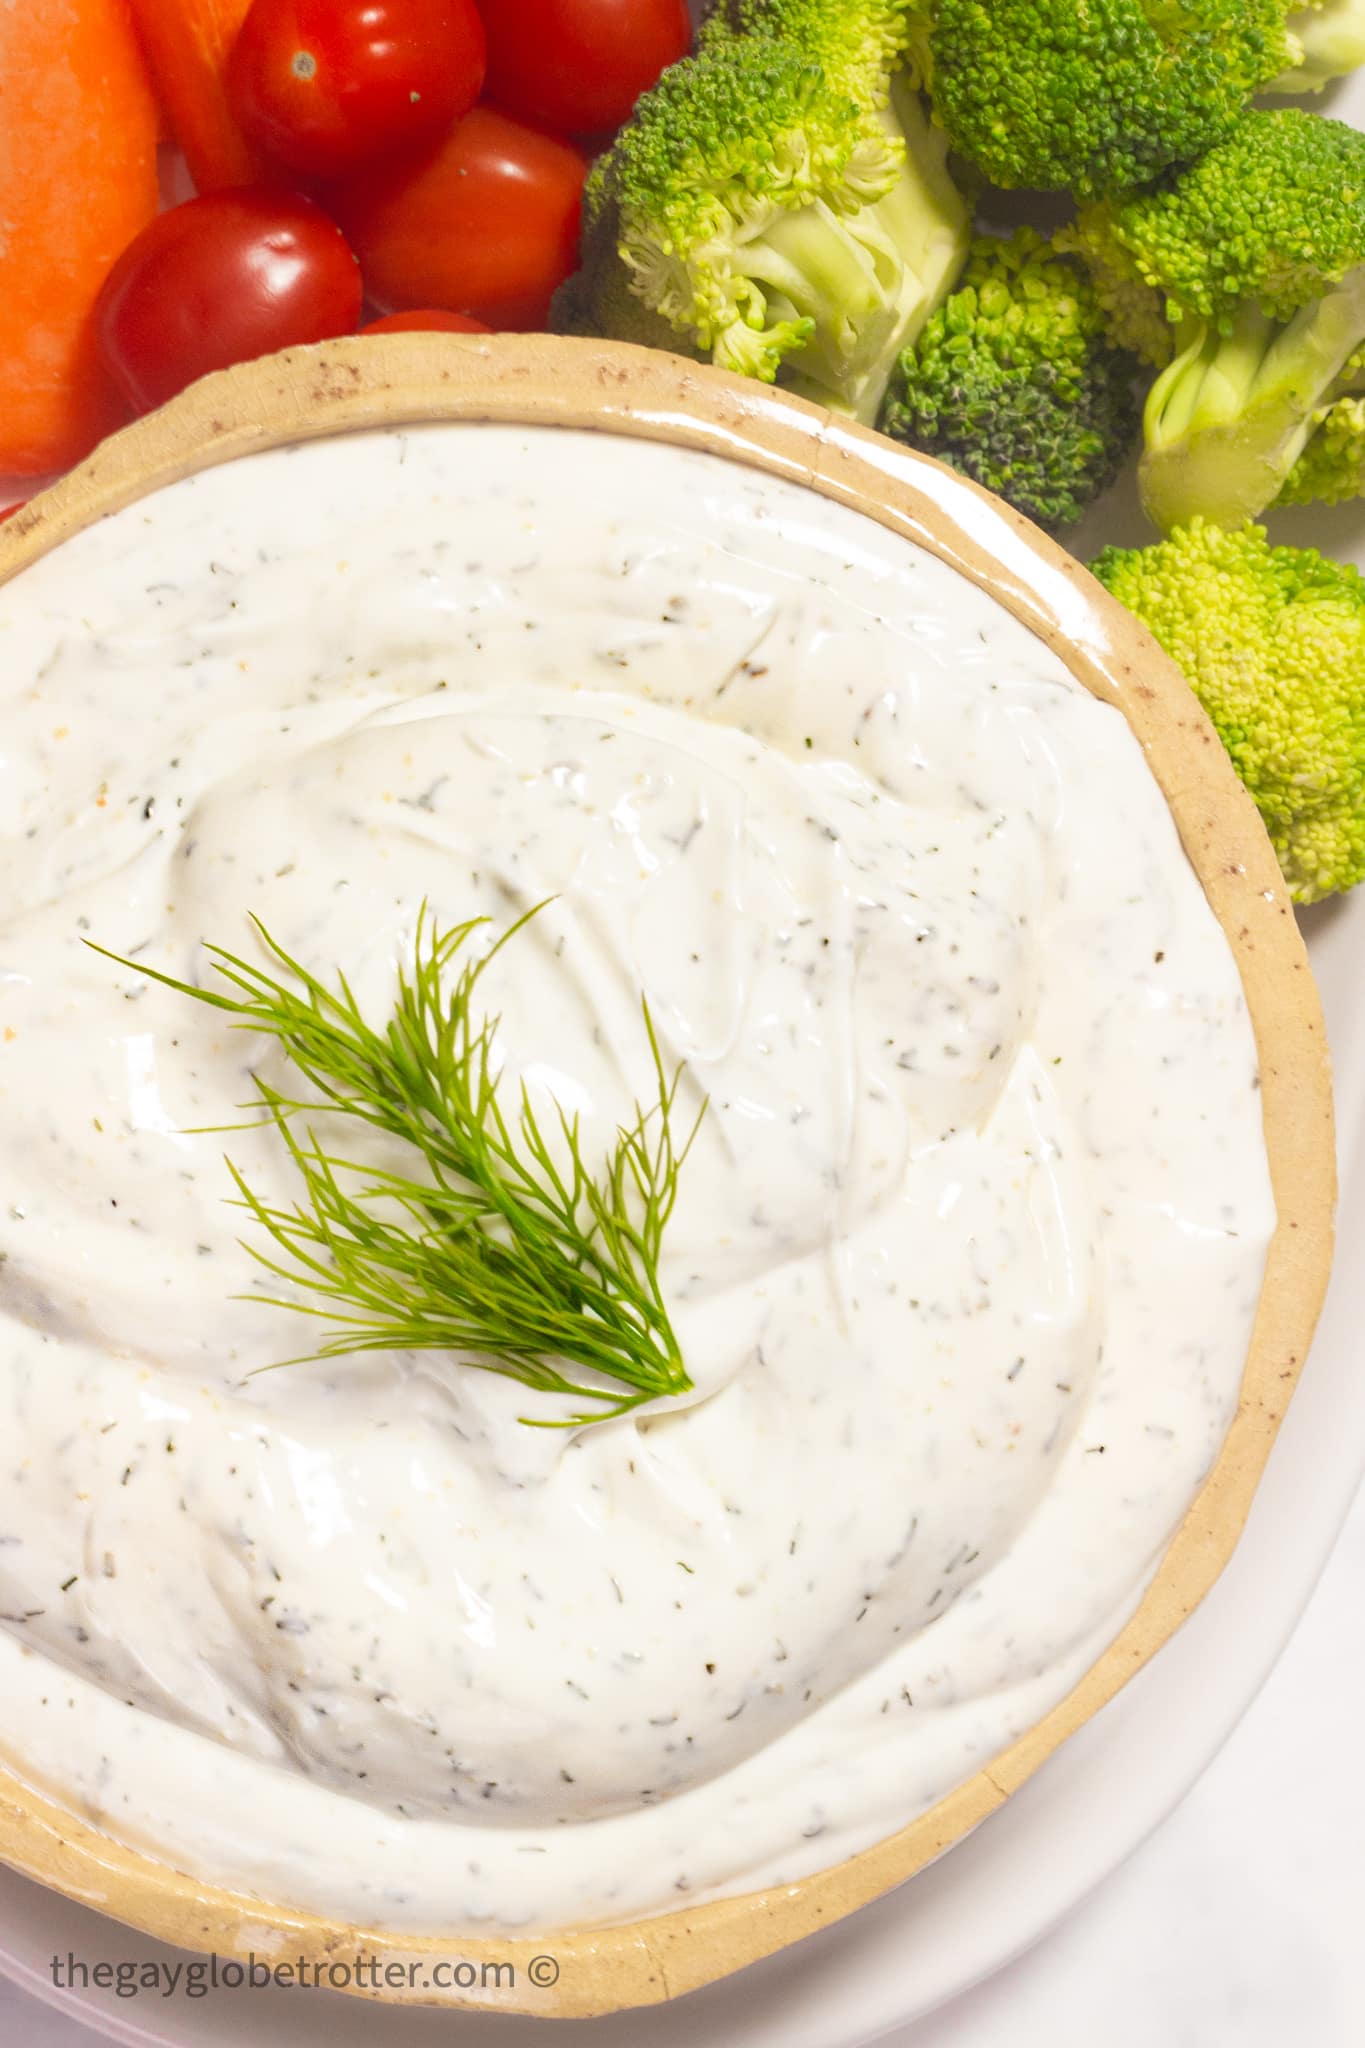 Creamy Creamy Dill Dip {Just 5 Ingredients!} - The Gay Globetrotter